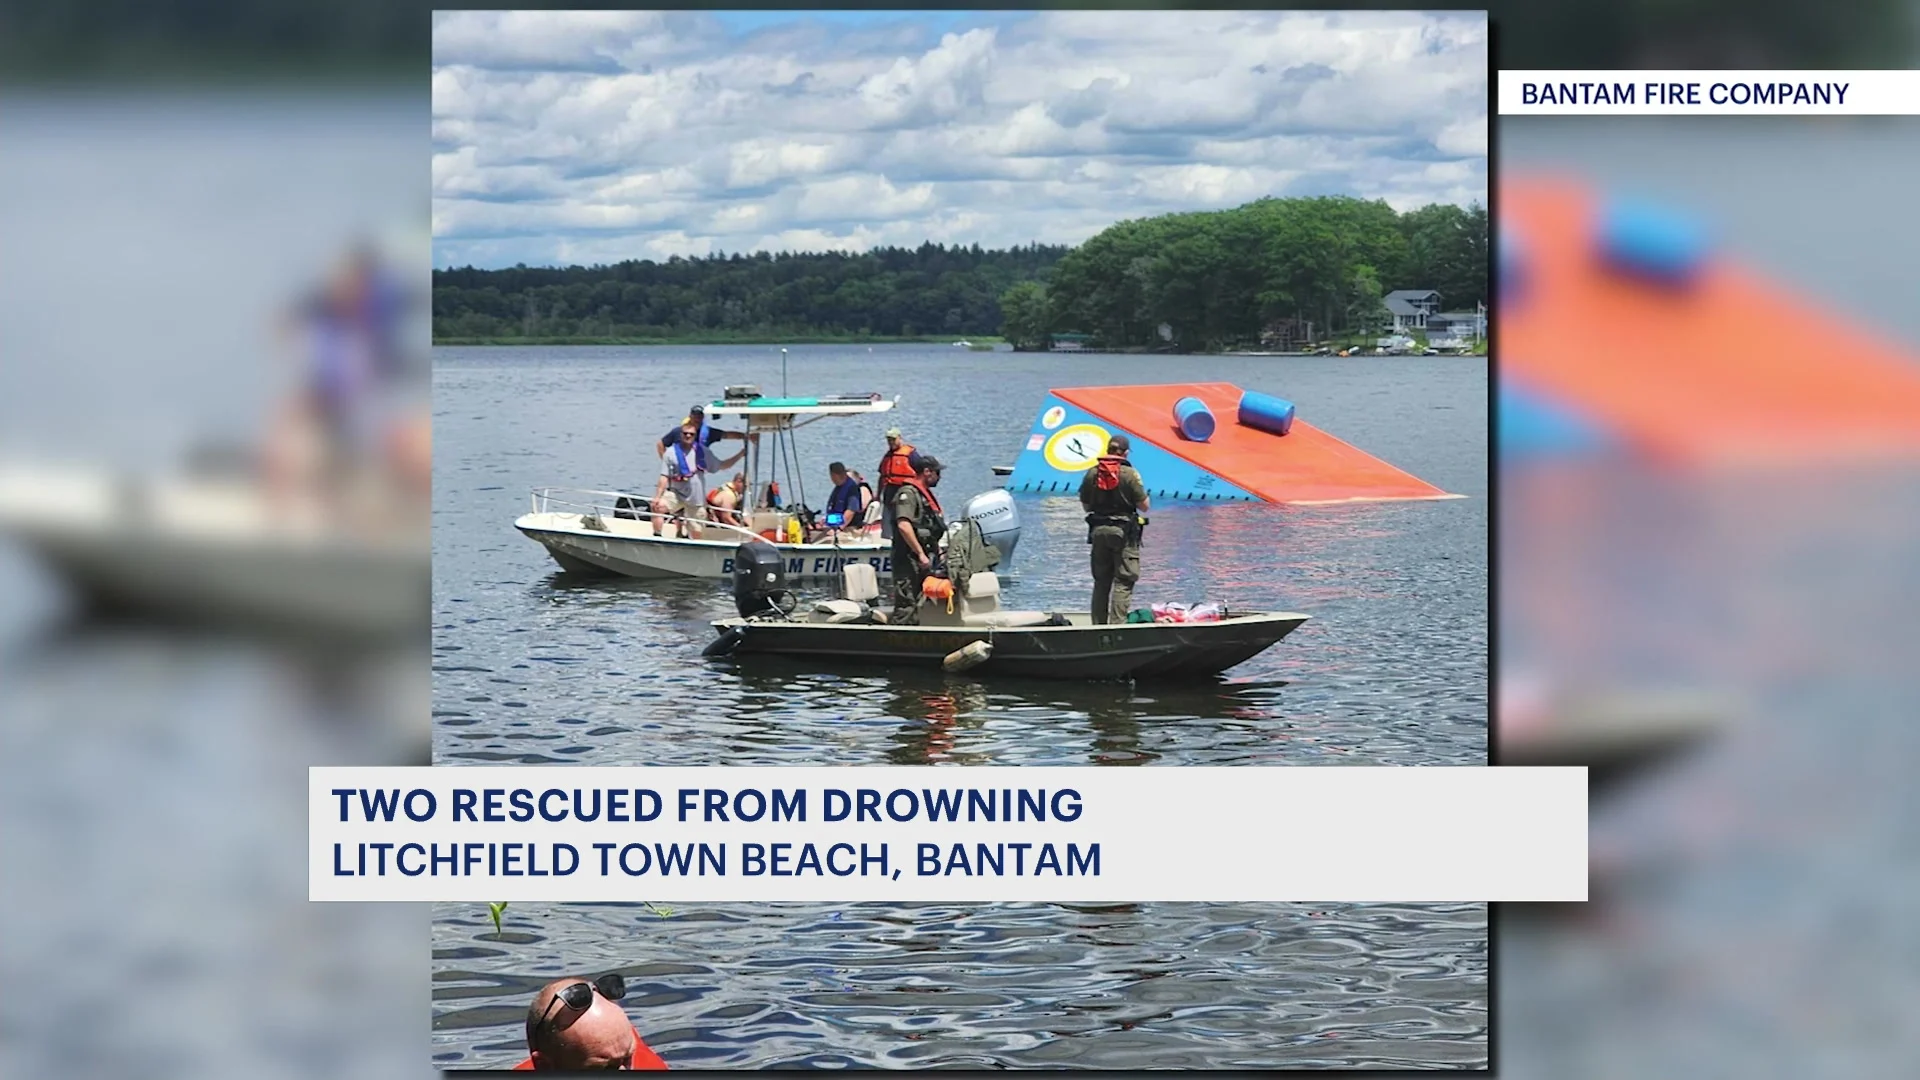 Officials: 2 people rescued from nearly drowning at Bantam Lake